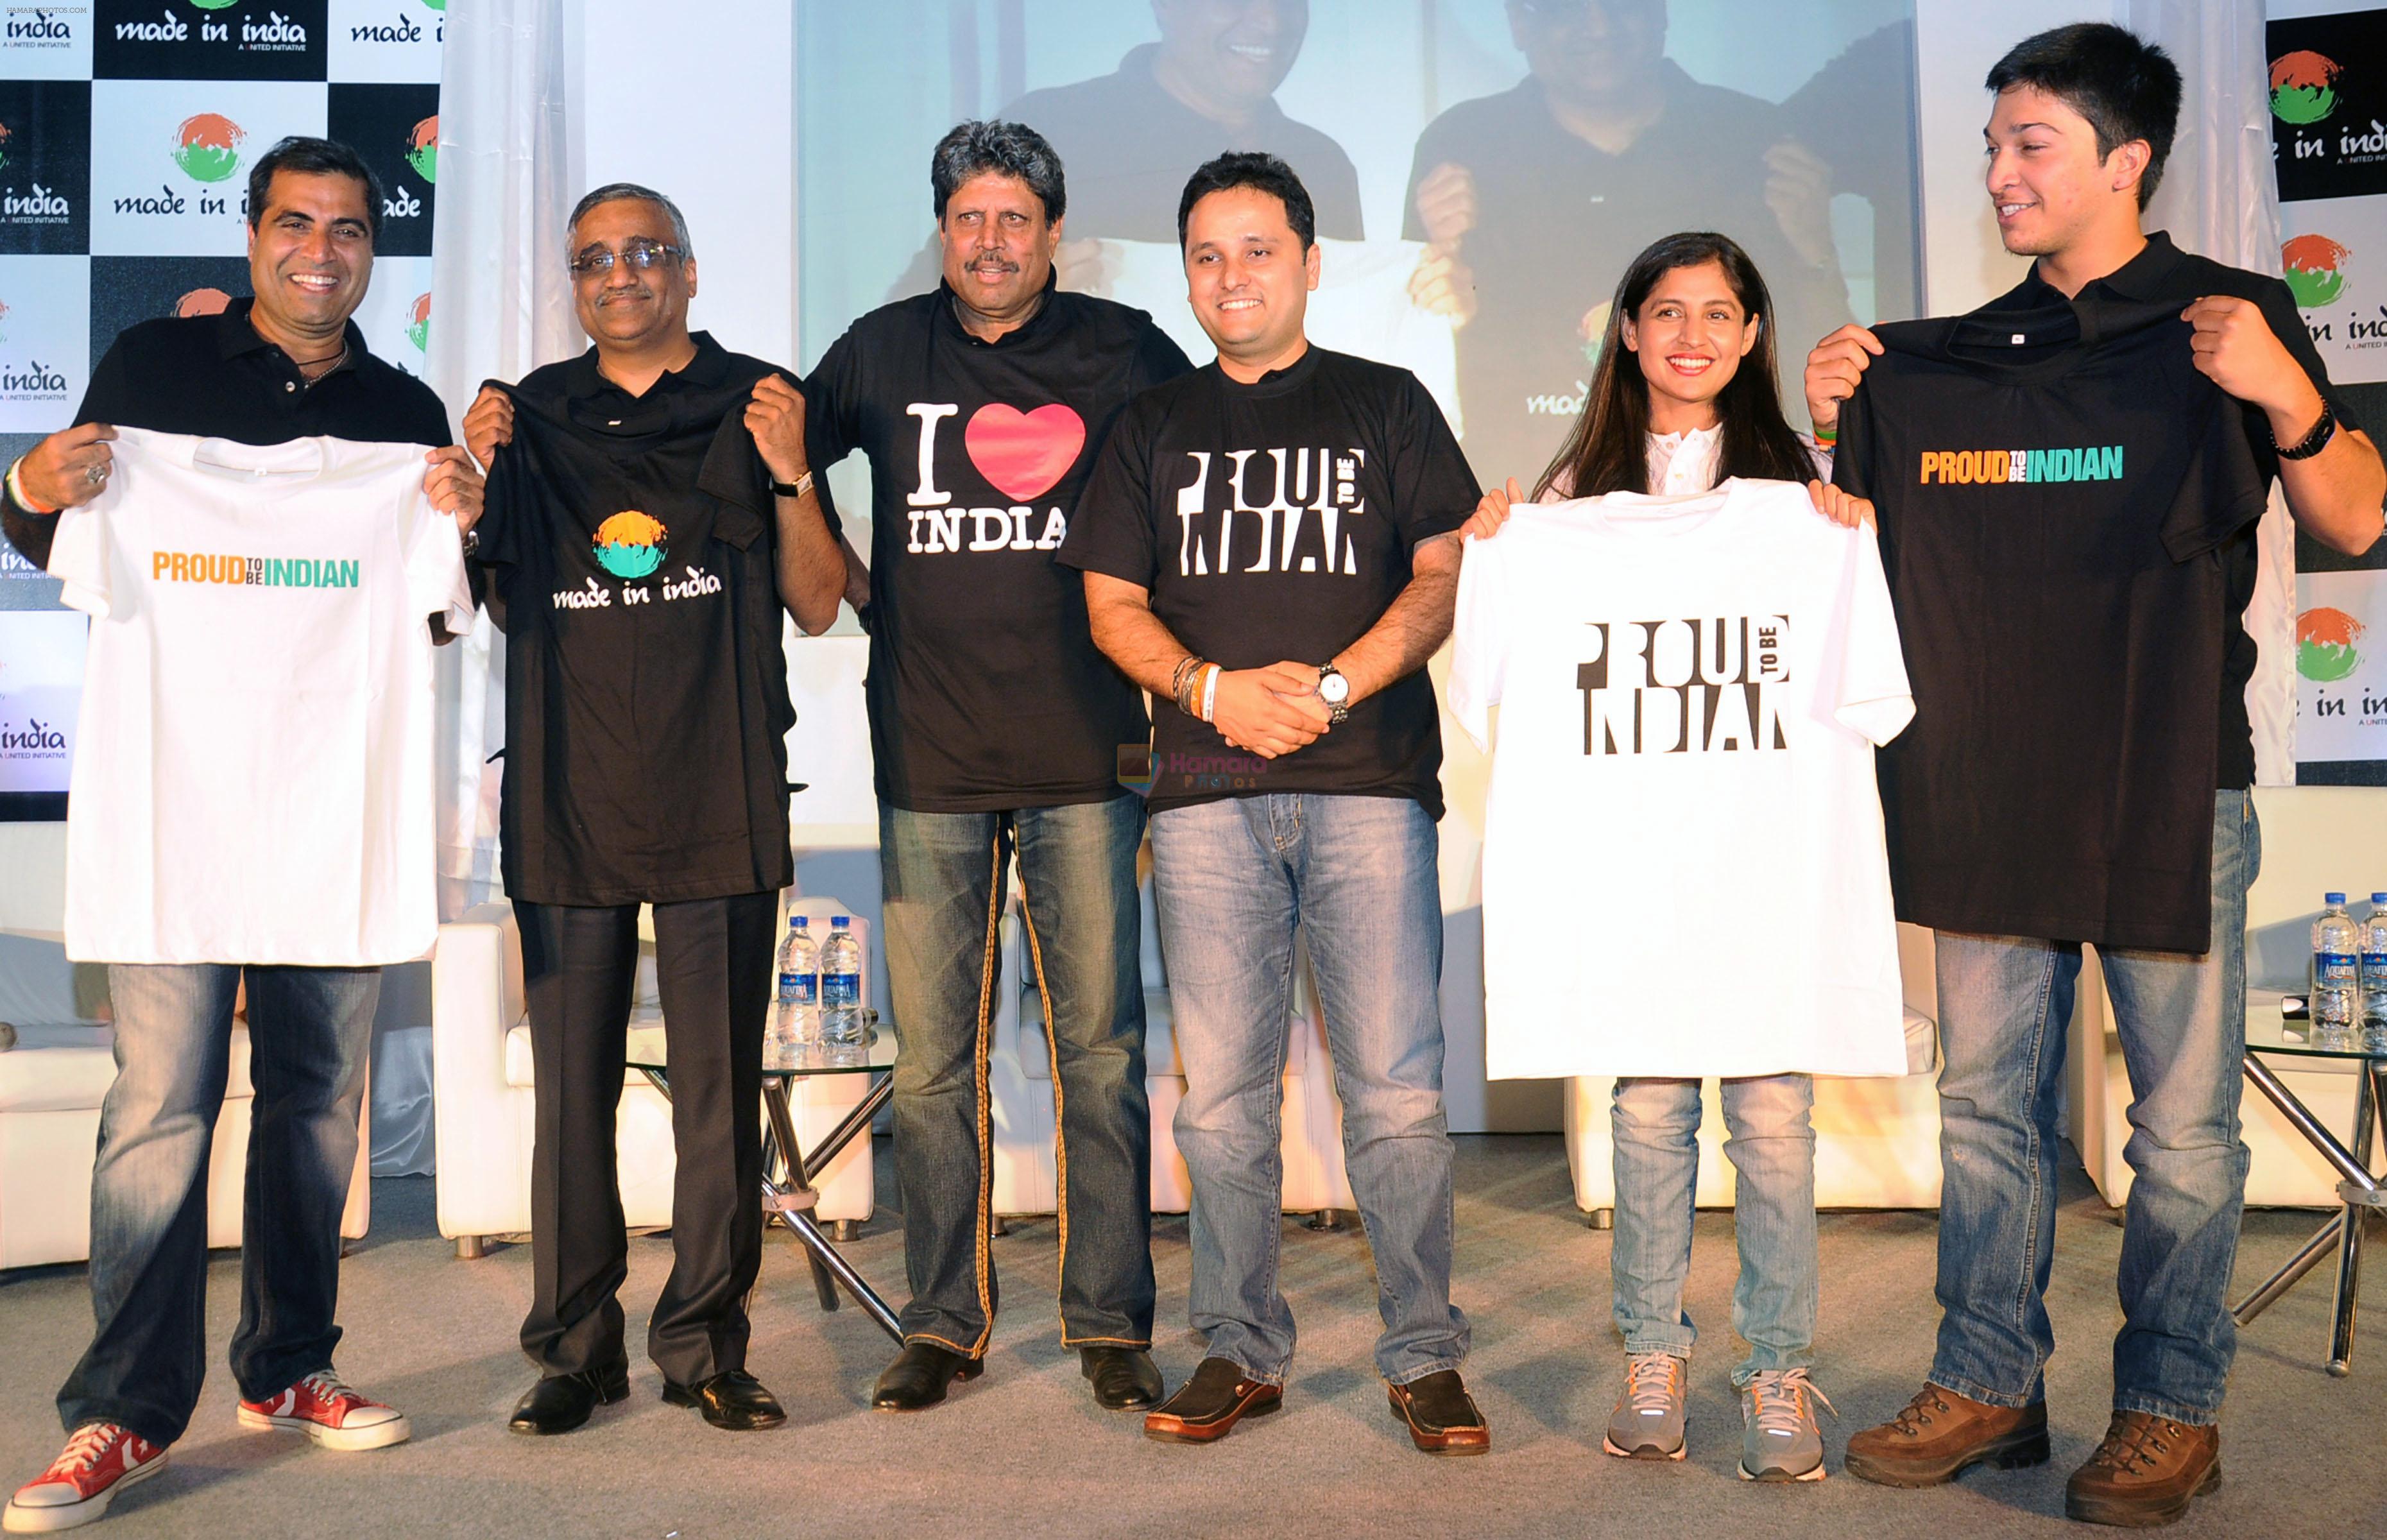 SHAILENDRA SINGH LAUNCHES MADE IN INDIA PROJECT on 19th Dec 2012